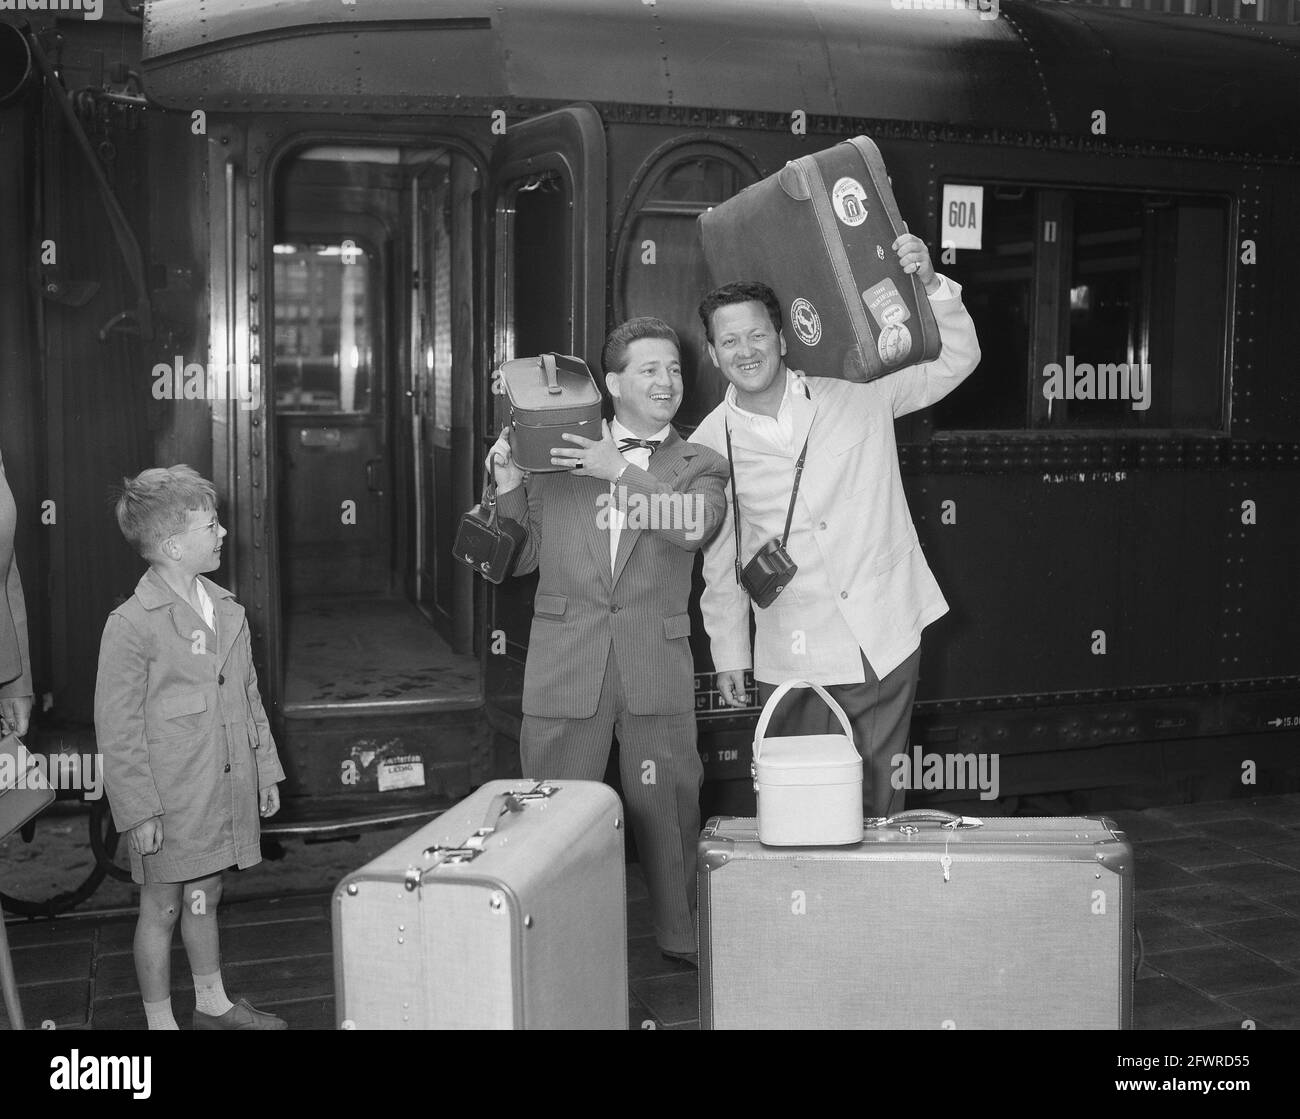 Dutch artists to Singing Festival in Venice, Willy Alberti and Johnny  Jordaan pose with their luggage at Amsterdam Central Station, June 25,  1957, artists, song festivals, The Netherlands, 20th century press agency